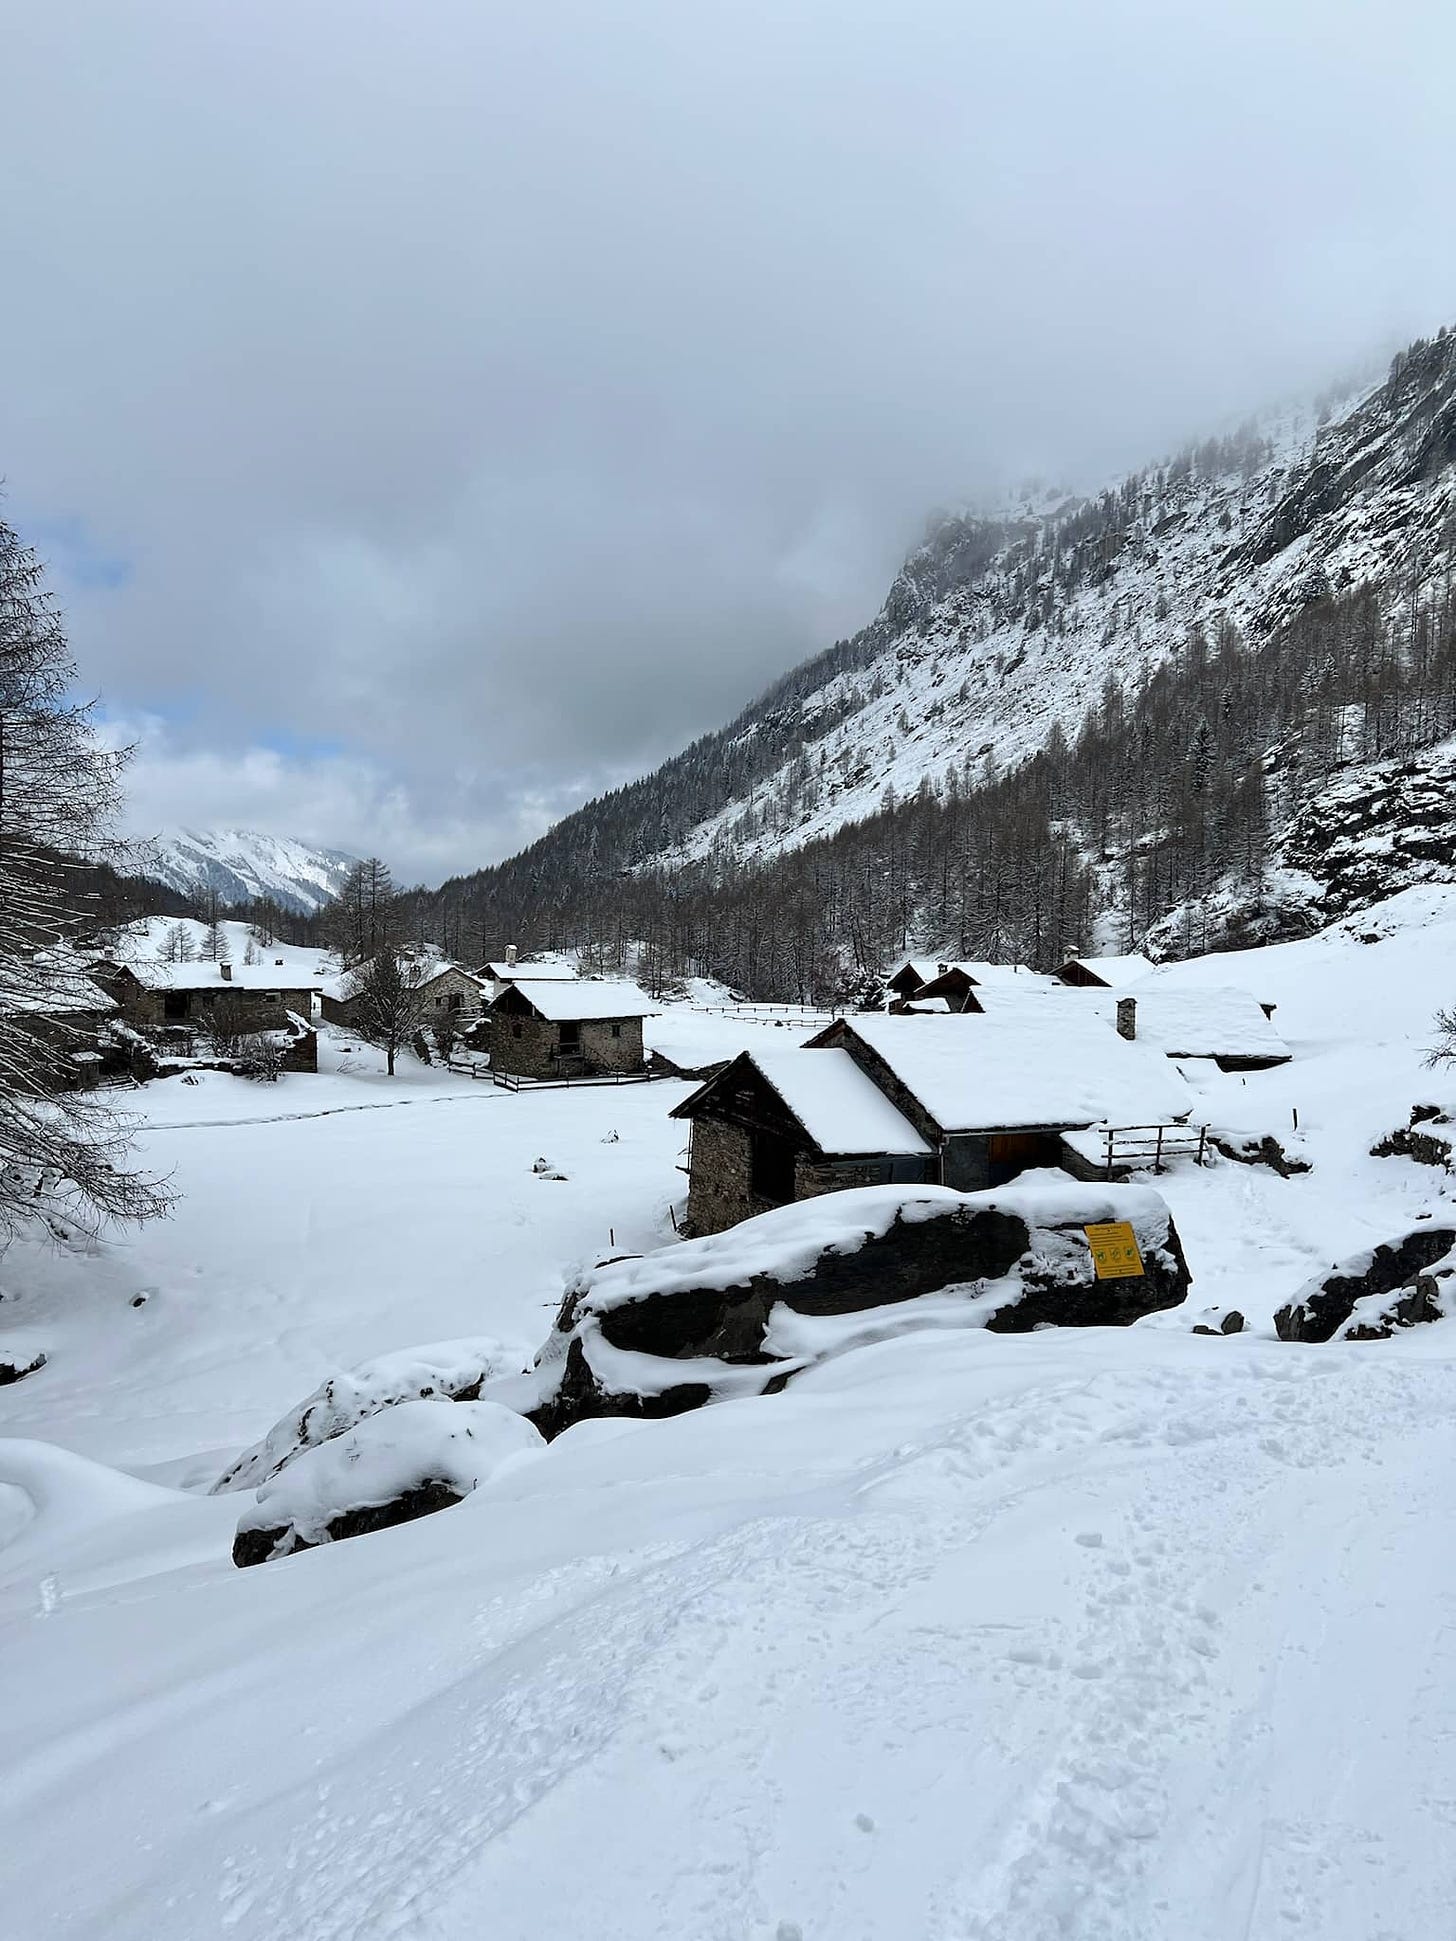 A photo of the village, Le Monal. It has a handful of small shack-like buildings covered in snow.